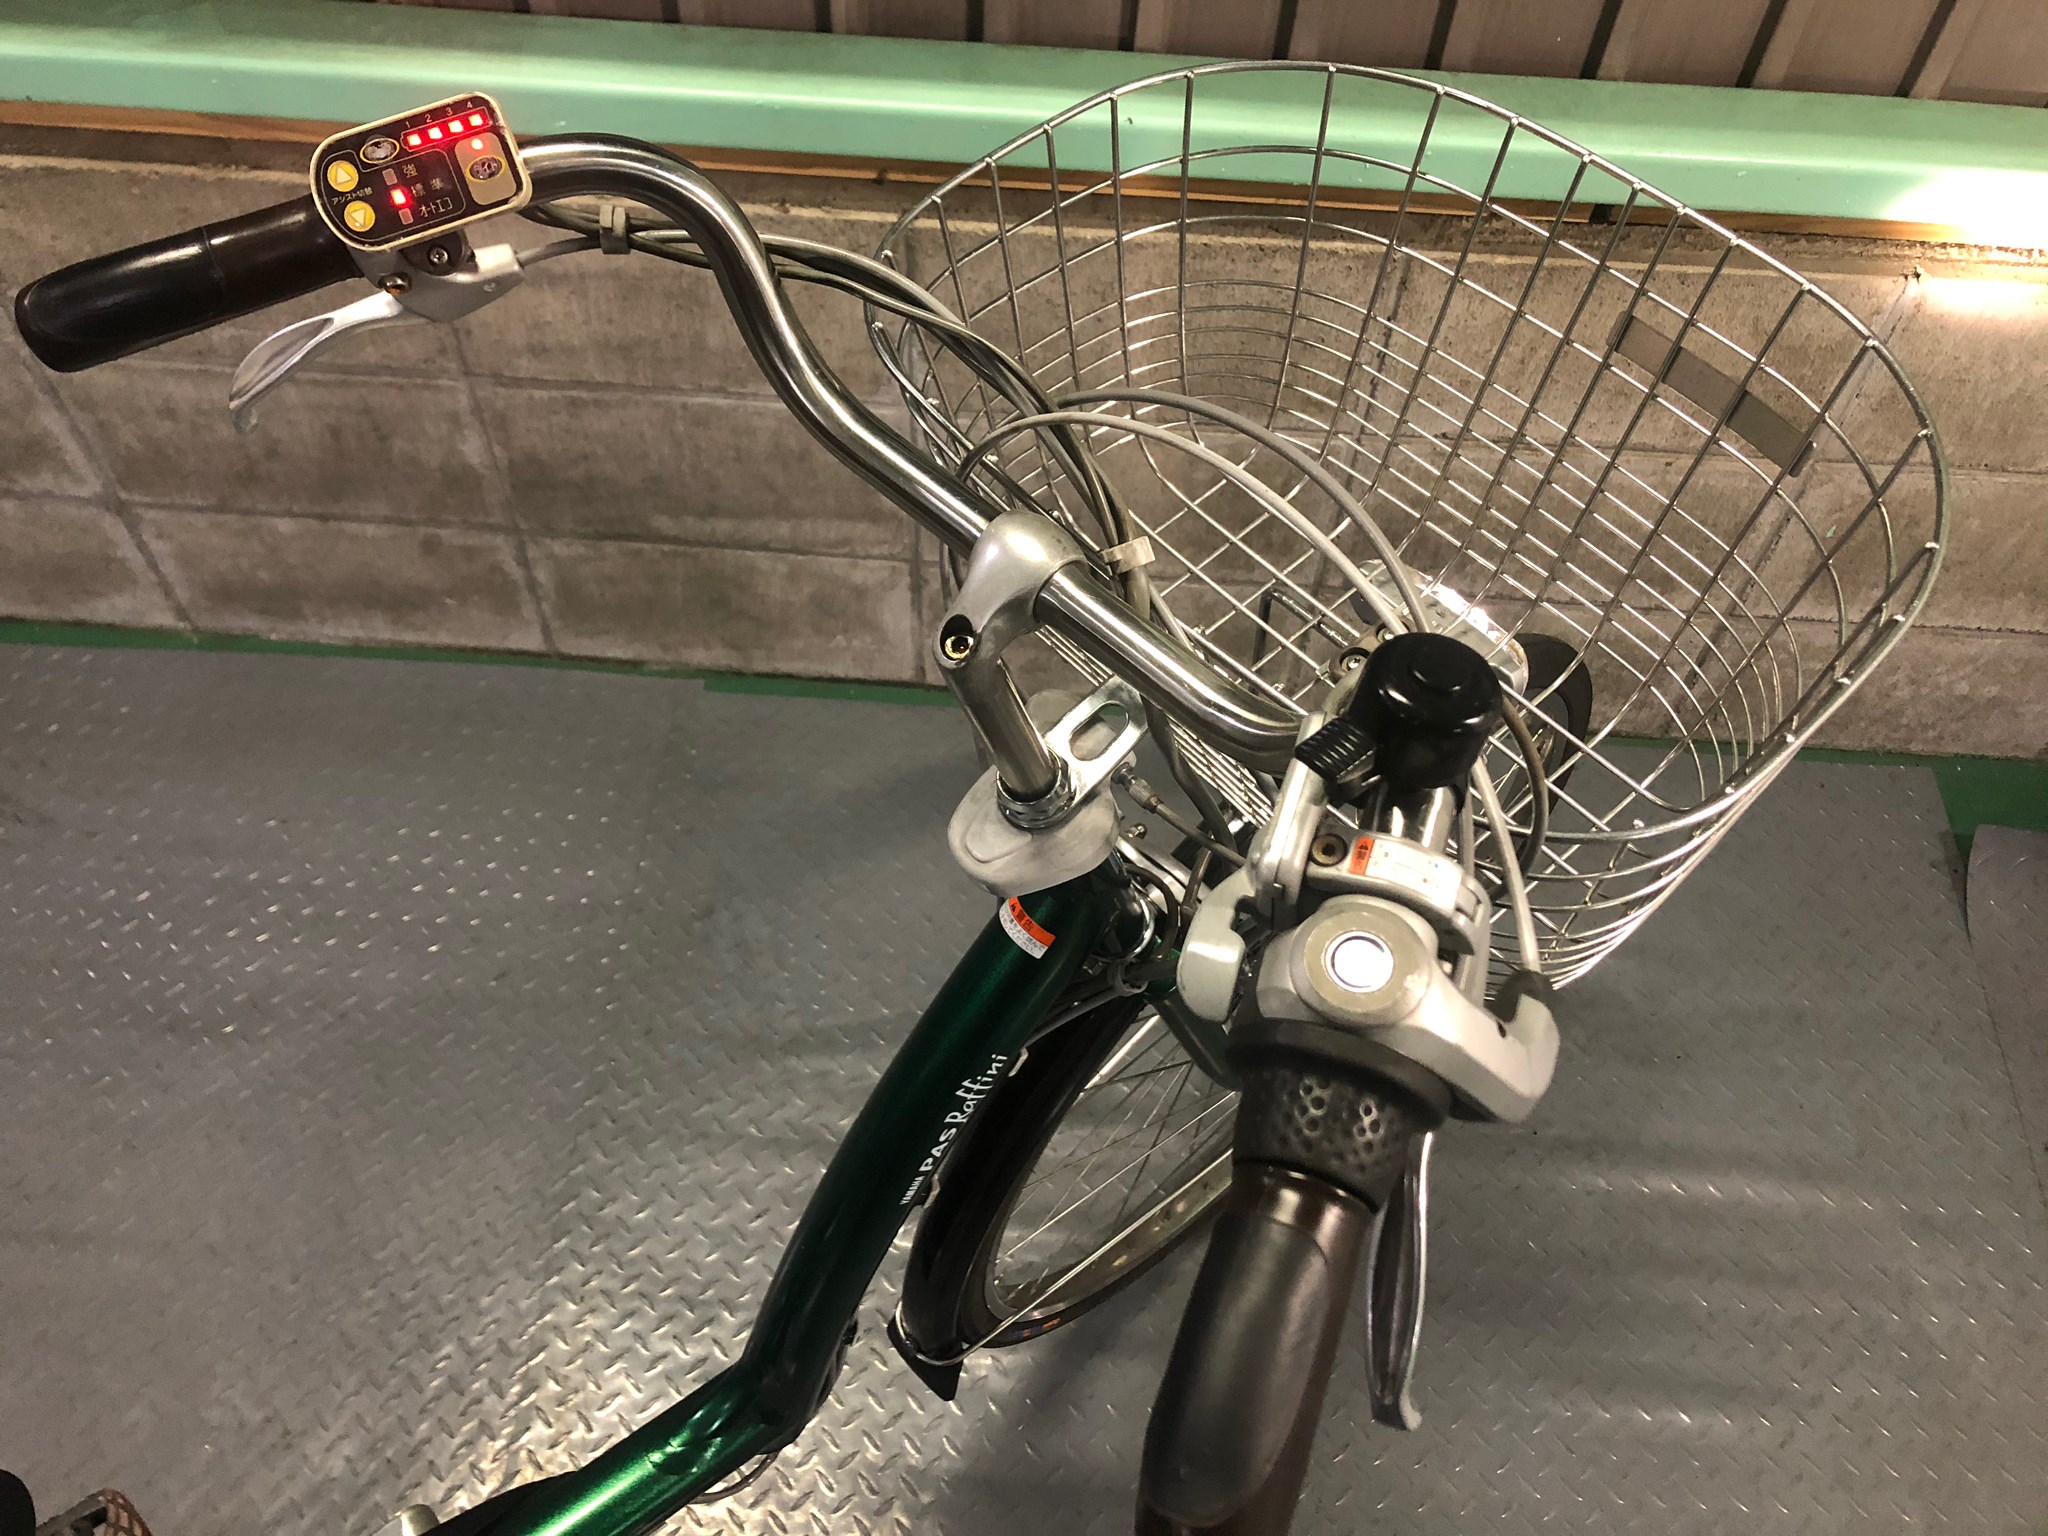 【SOLD OUT】電動自転車 ヤマハ PAS ラフィーニ 26インチ 大容量8.1Ah 緑 | 国産・中古の激安電動アシスト自転車を販売